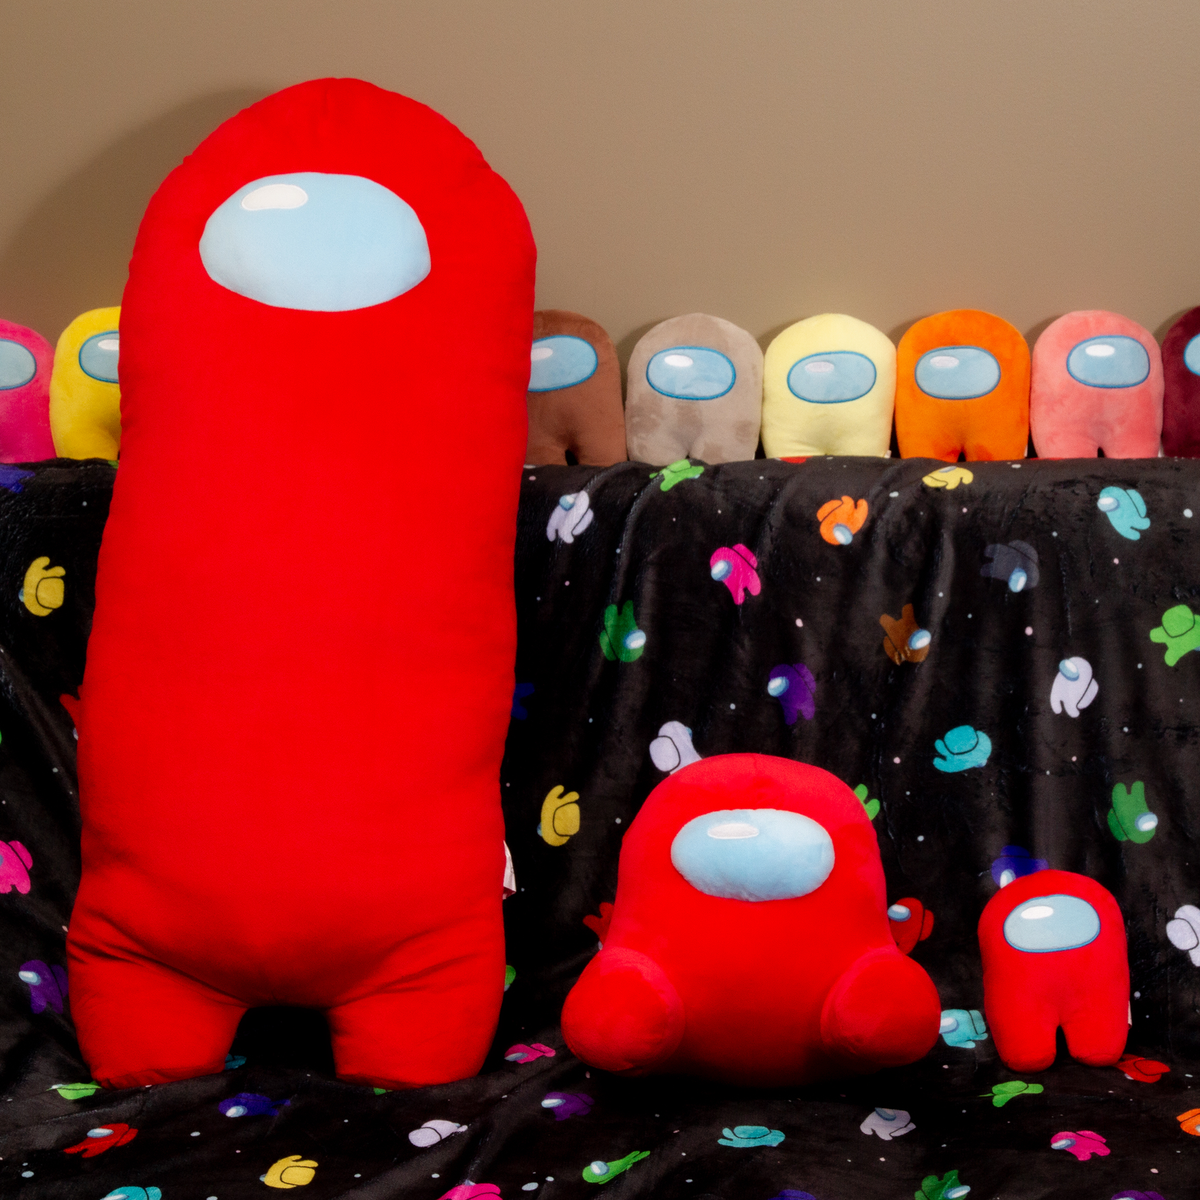 Several assorted colored tiny Crewmate Plush stand along the back of a couch. The Couch is draped with the patterned and colorful Crewmate Space Party Blanket. On top of the blanket is a line of three Red Crewmate Plush: a Longbean Plush, a Sitting Red Crewmate Plush, and a tinier Red Crewmate Plush. Longbean plush is designed by Zara Varin. The Sitting plush &amp; tinier plush are designed by Frisk Wolfie.